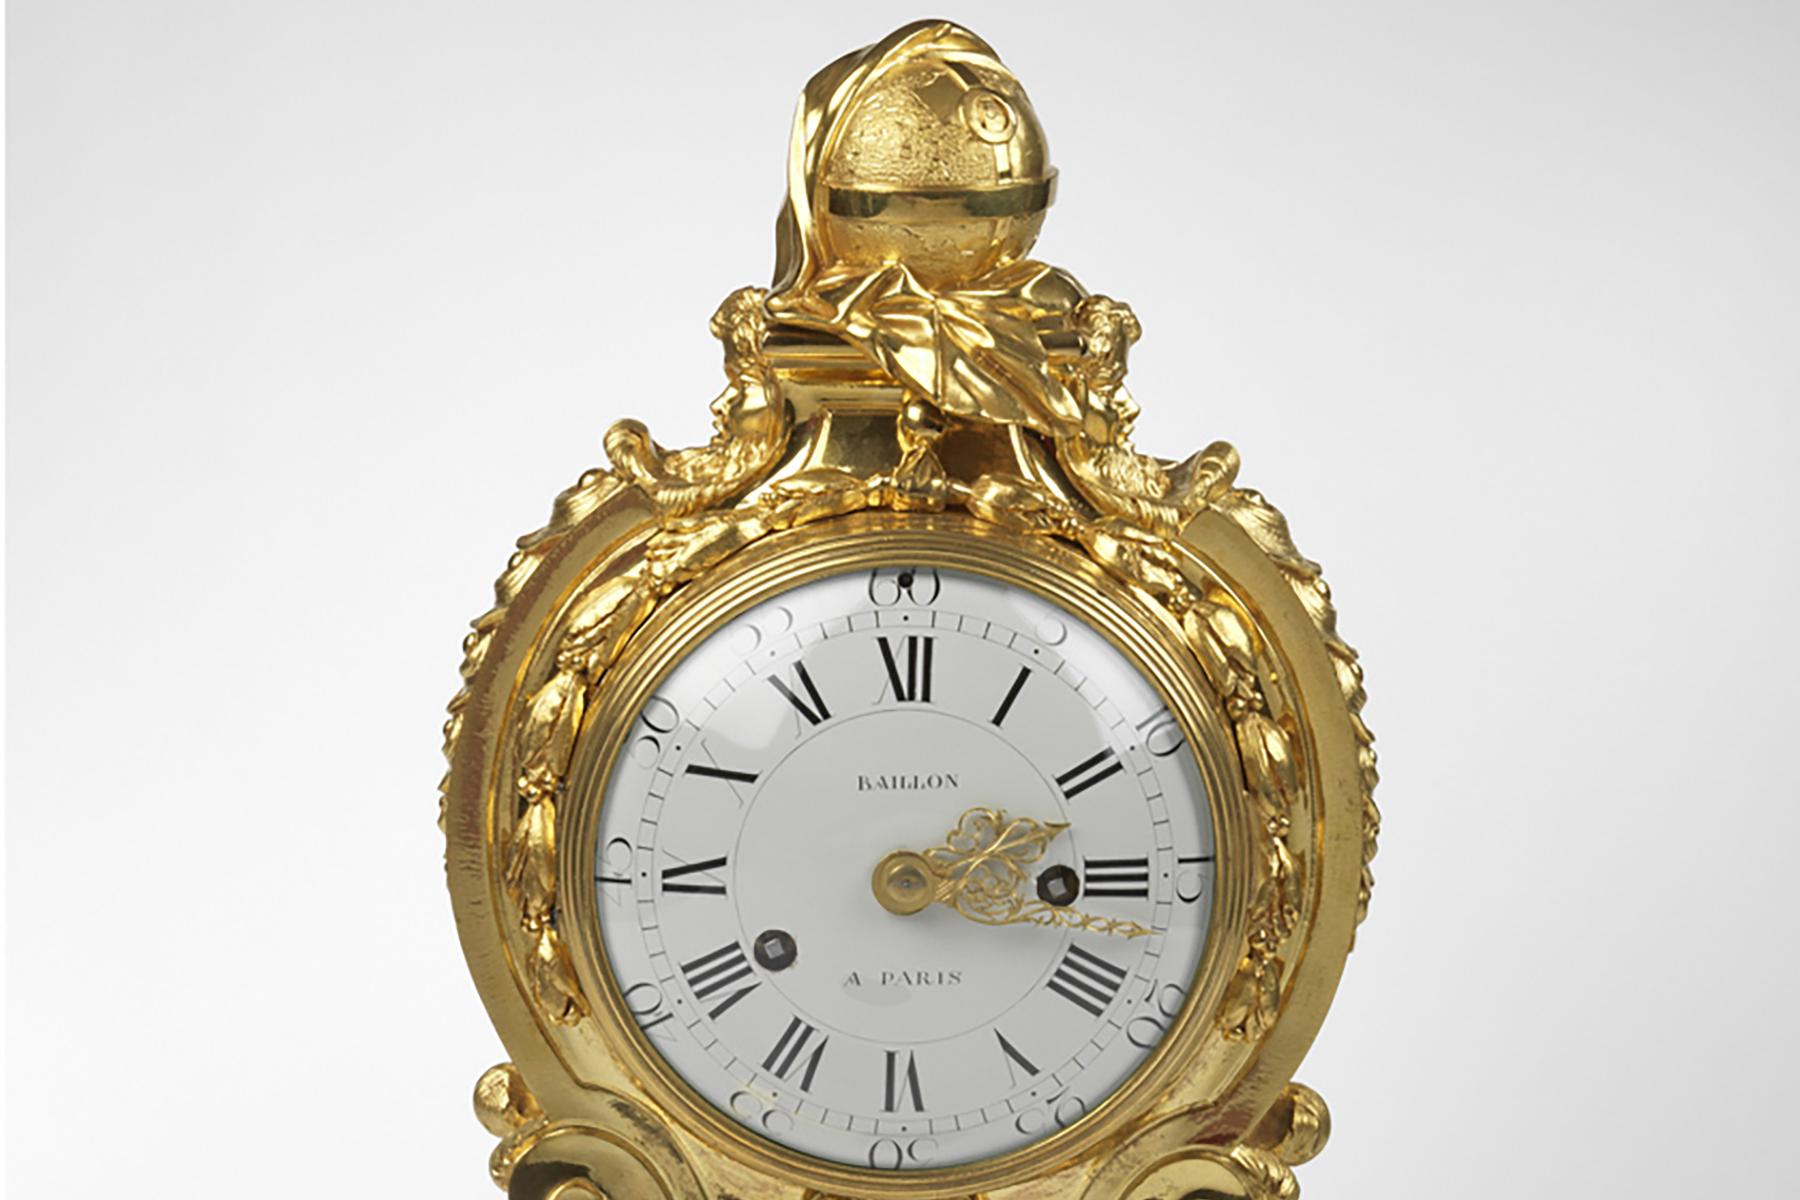 The white enamel dial is set within an ormolu drum-shaped case with a bead and reel border and signed Baillon à Paris. The drum is raised on scrolls, above a shaped rectangular base with a pierced ormolu grill, with a lion’s mask holding golden